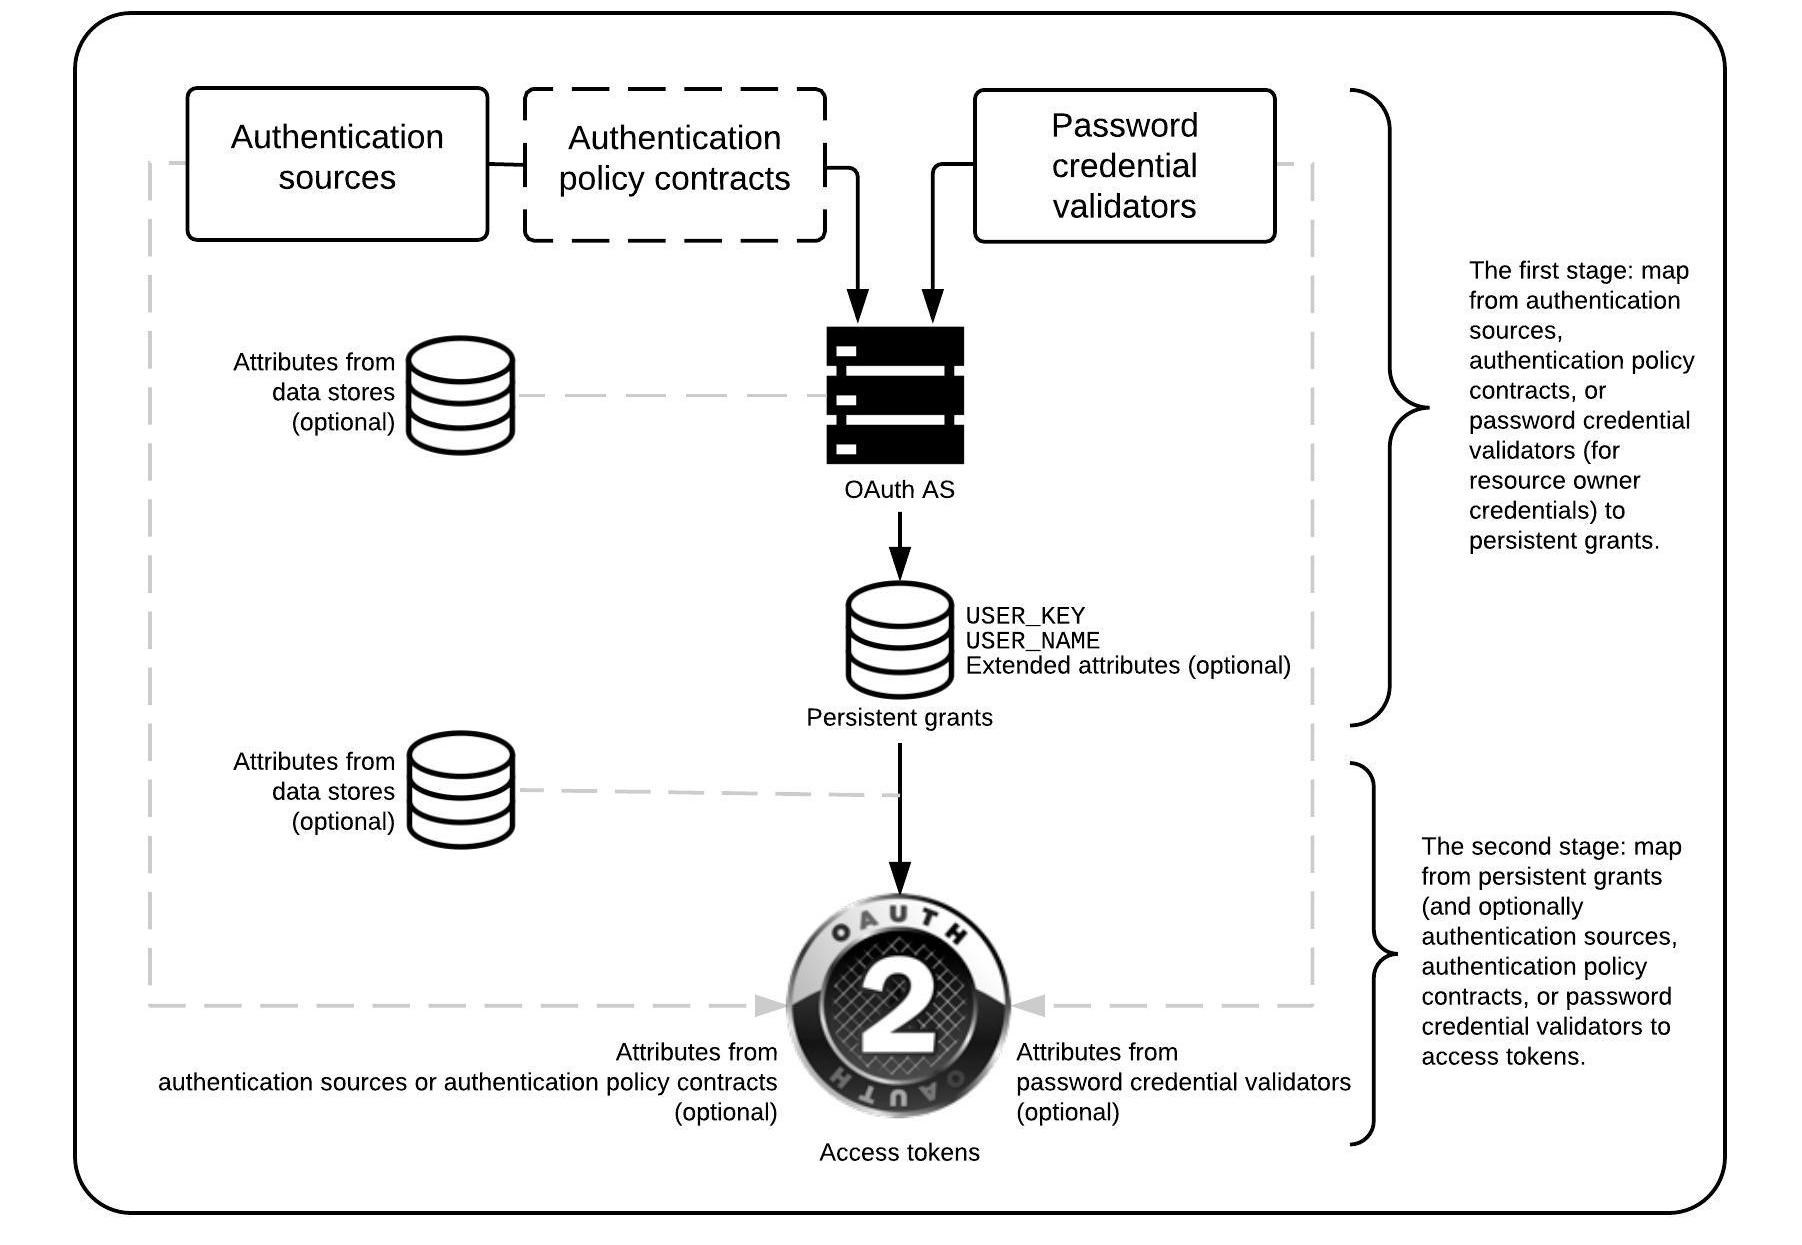 This figure depicts a common framework for how user attributes are mapped into OAuth tokens.